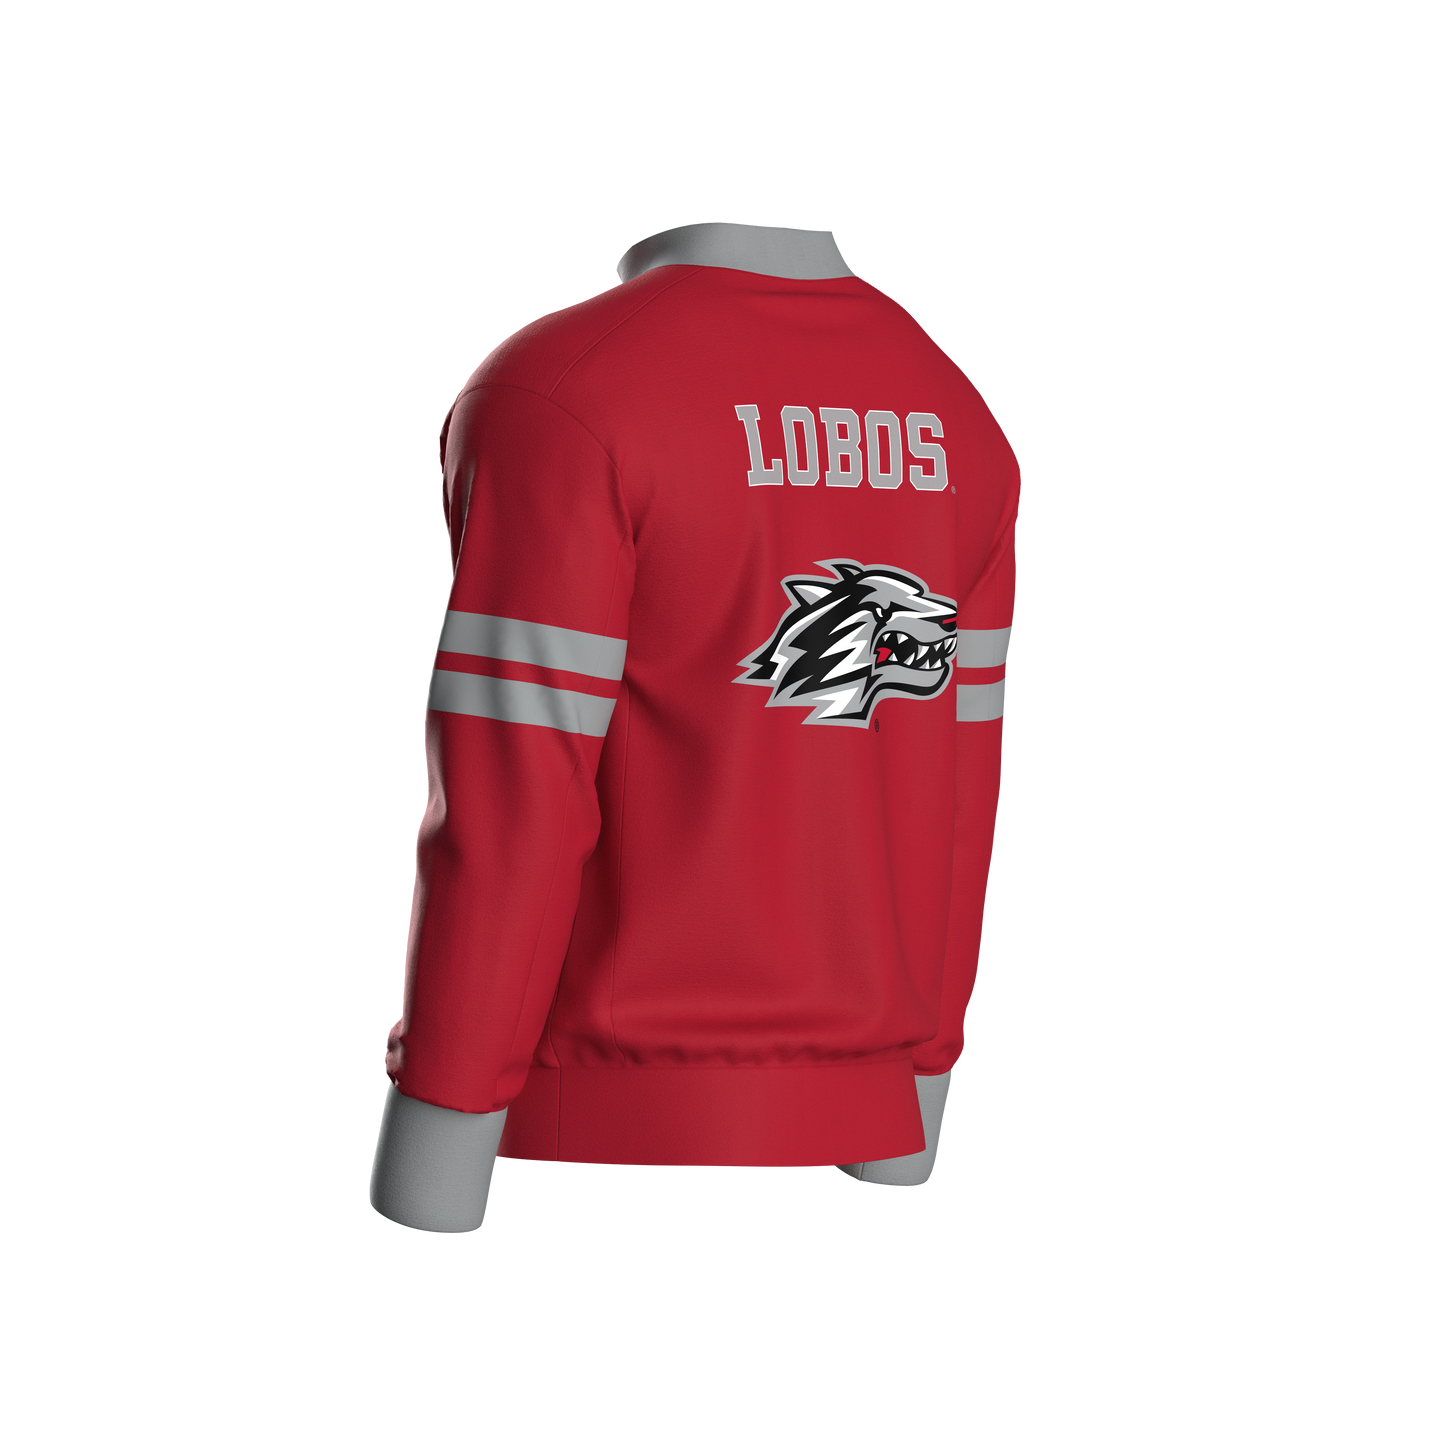 University of New Mexico Home Pullover (adult)